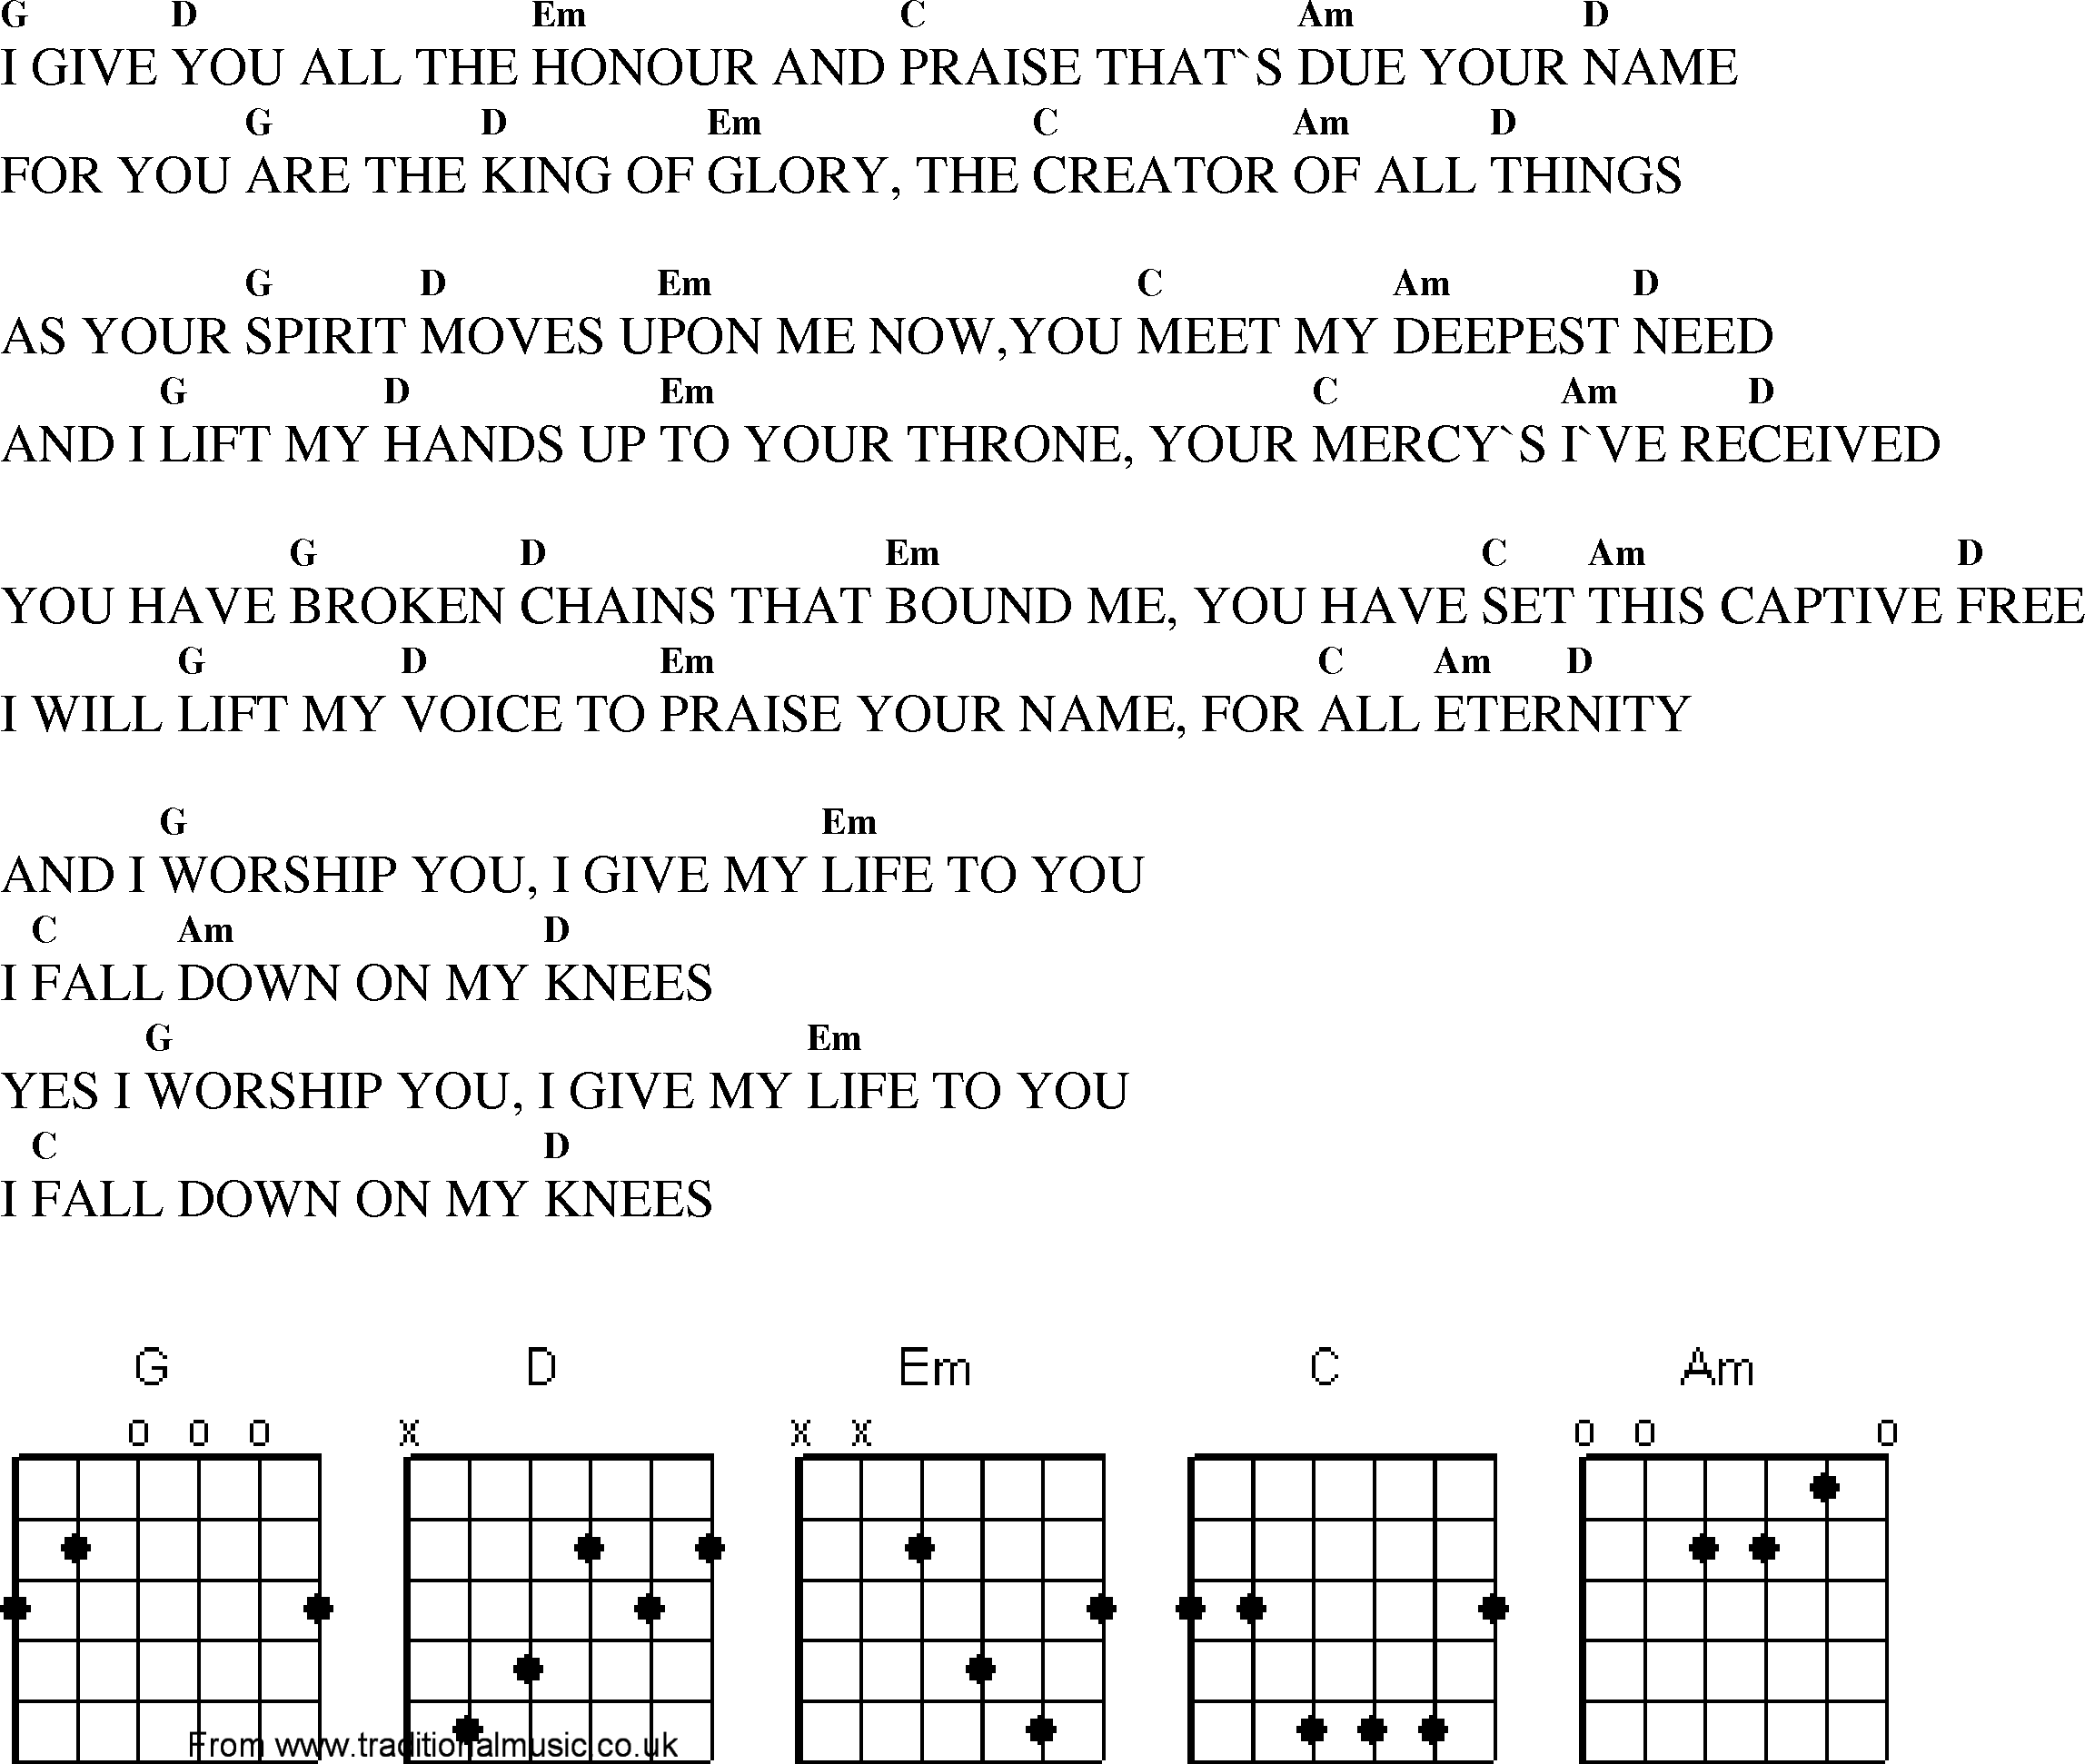 Gospel Song: i_give_you_ll_the_honour, lyrics and chords.